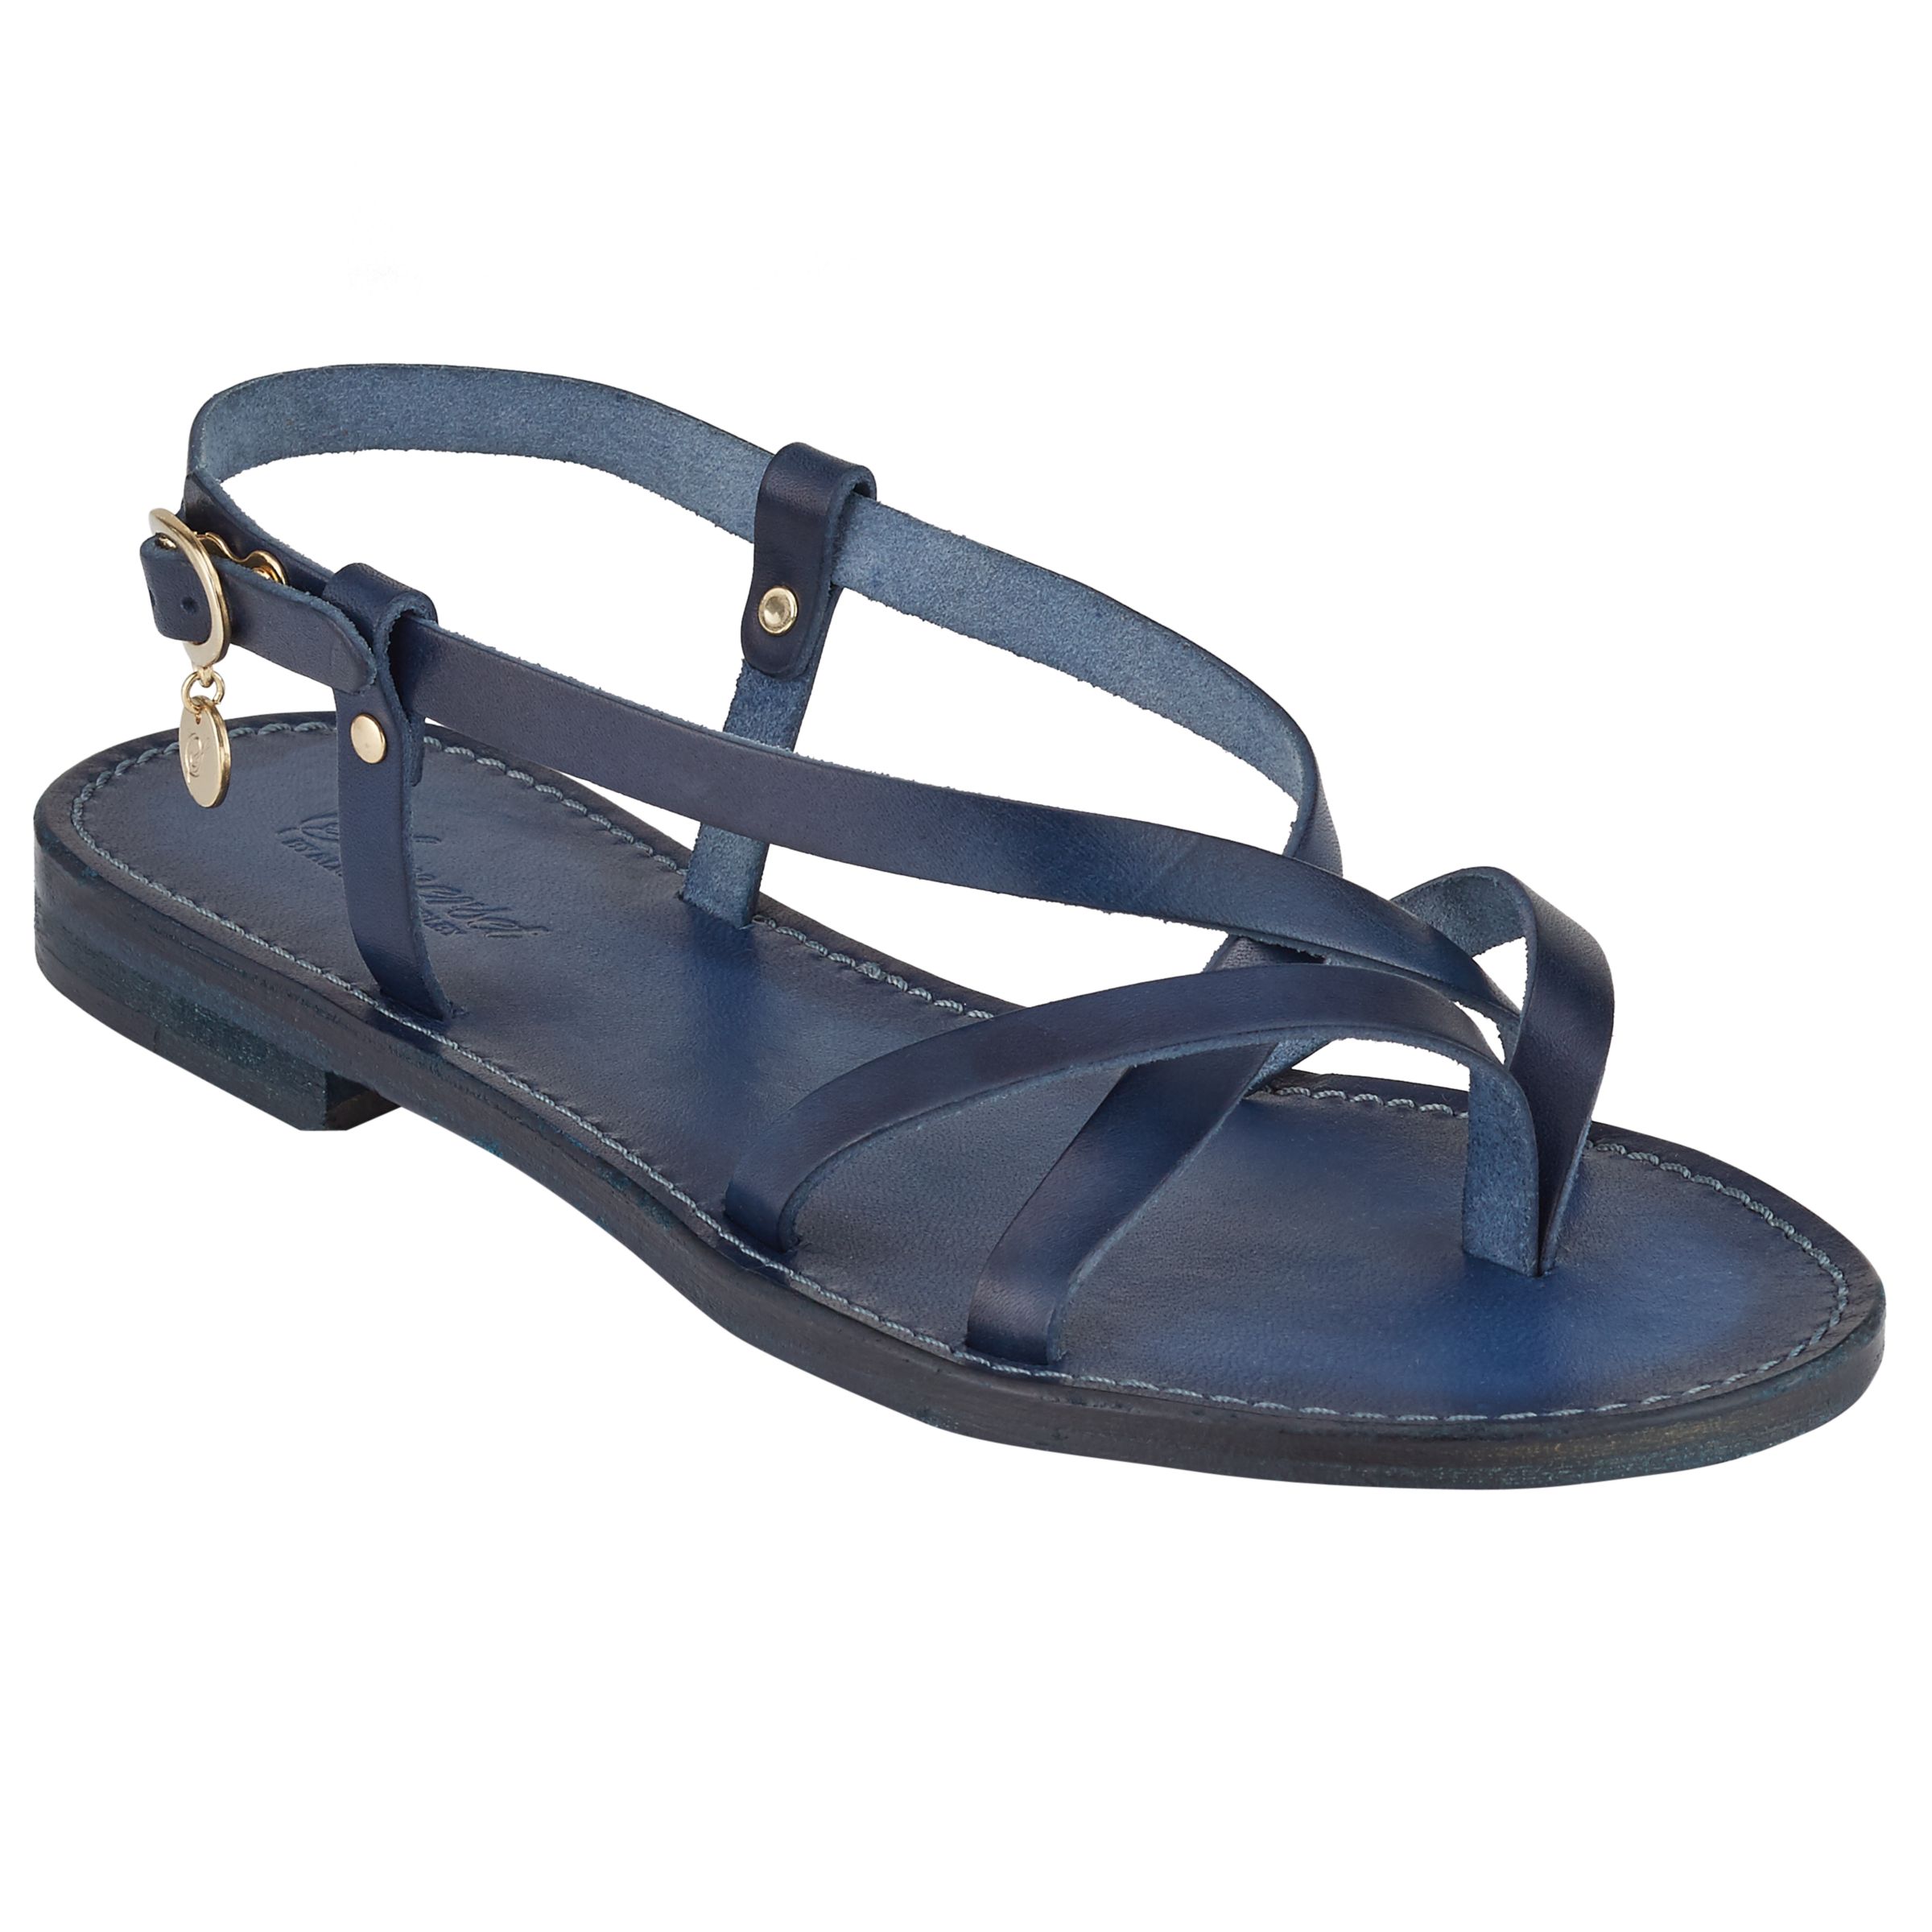 Somerset by Alice Temperley Loxton Sandals, Navy, 8